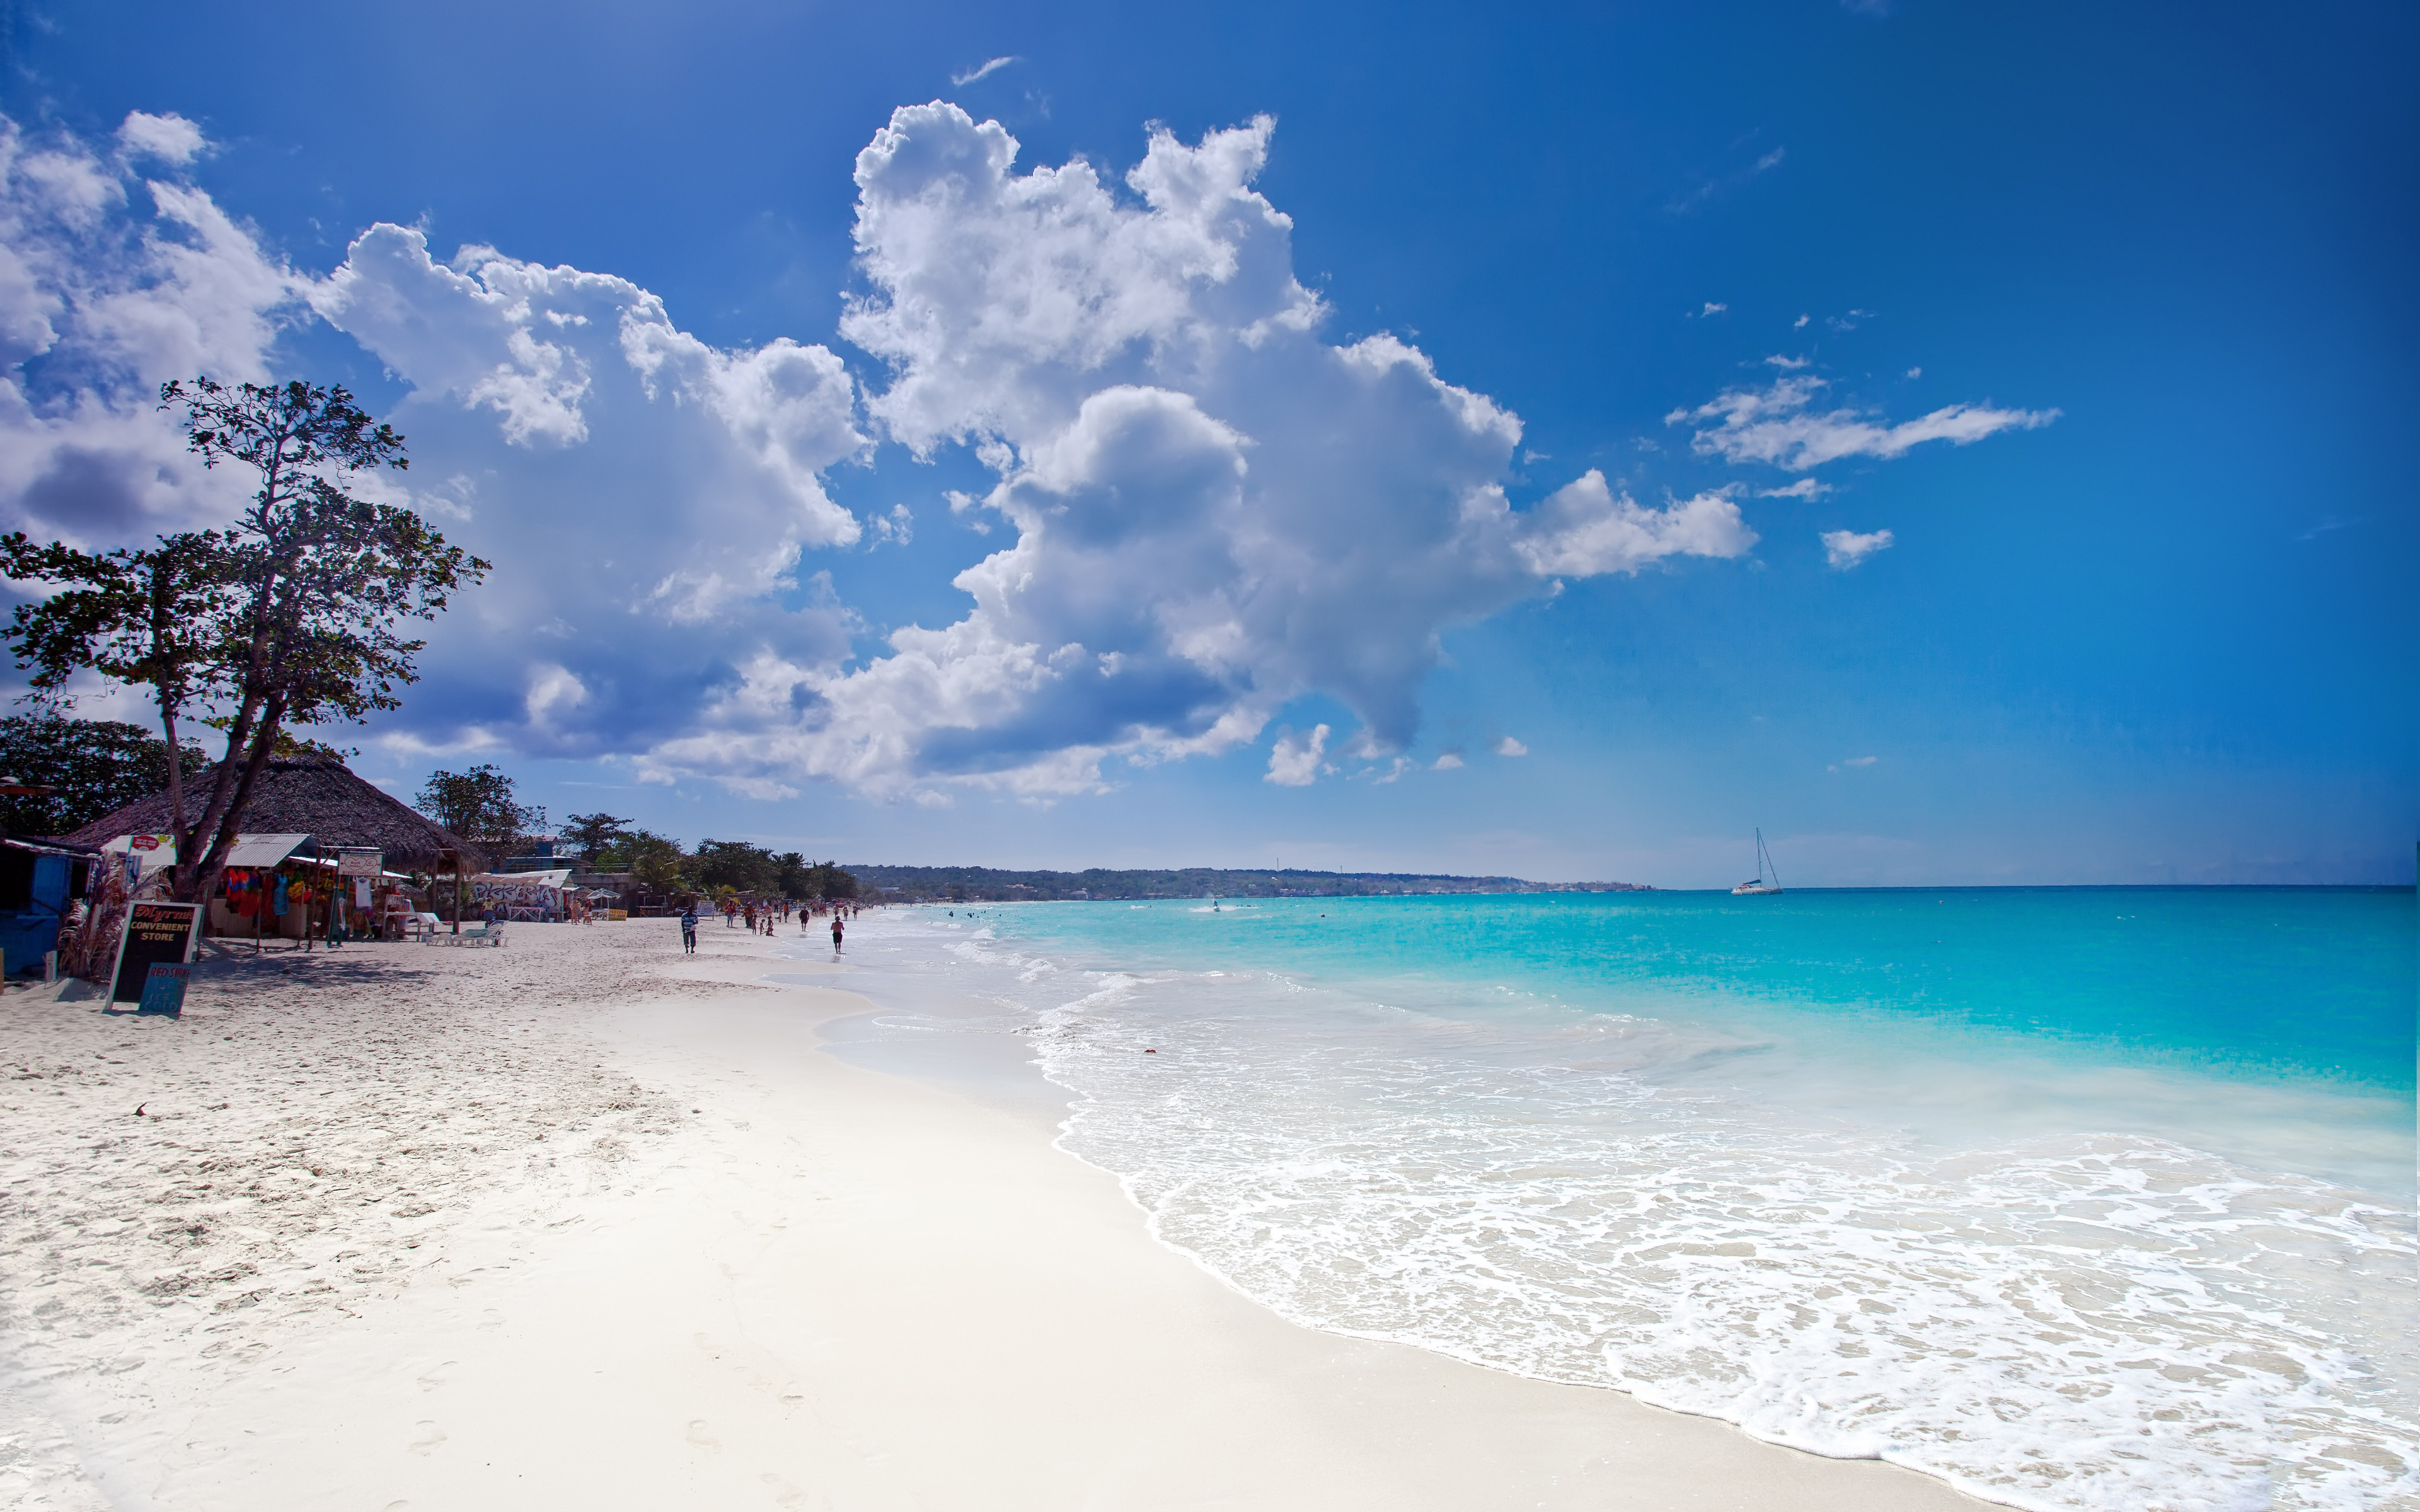 The Famous 7 Mile Beach, Jamaica, Negril widescreen wallpaper. Wide